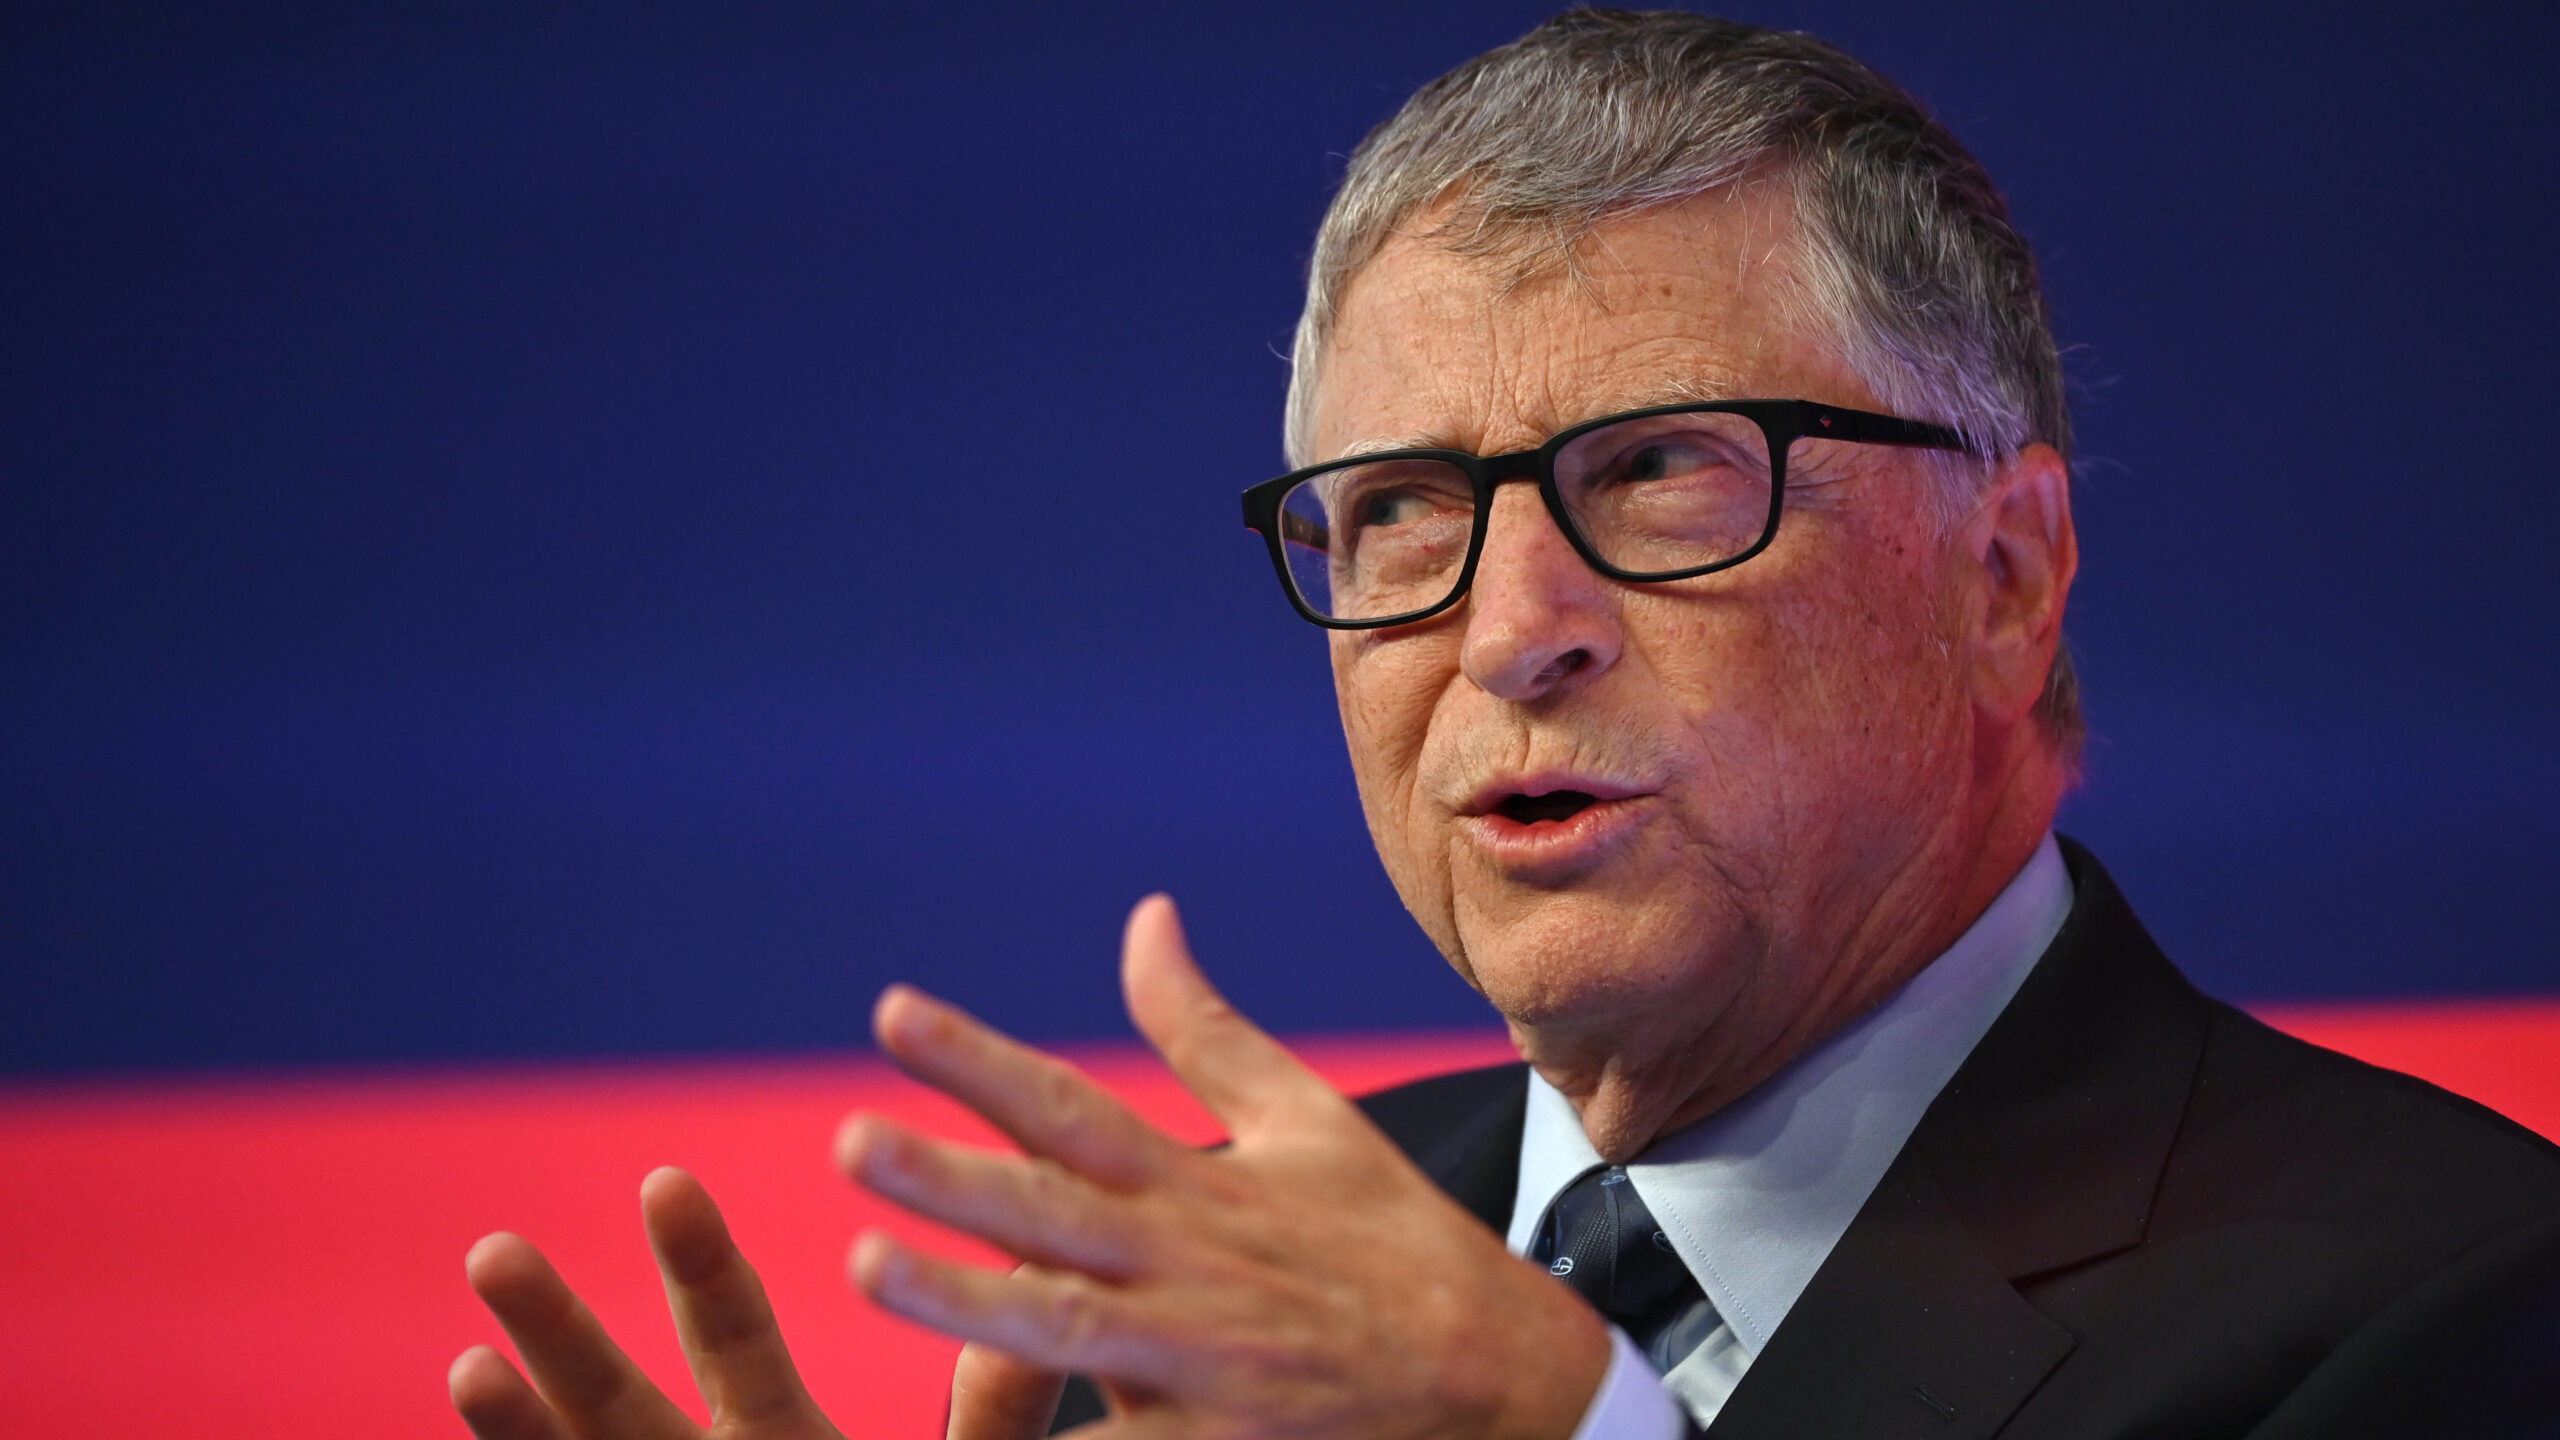 Bill Gates made remarks about the future possibility of a civil war and a hung election, according to Forbes.